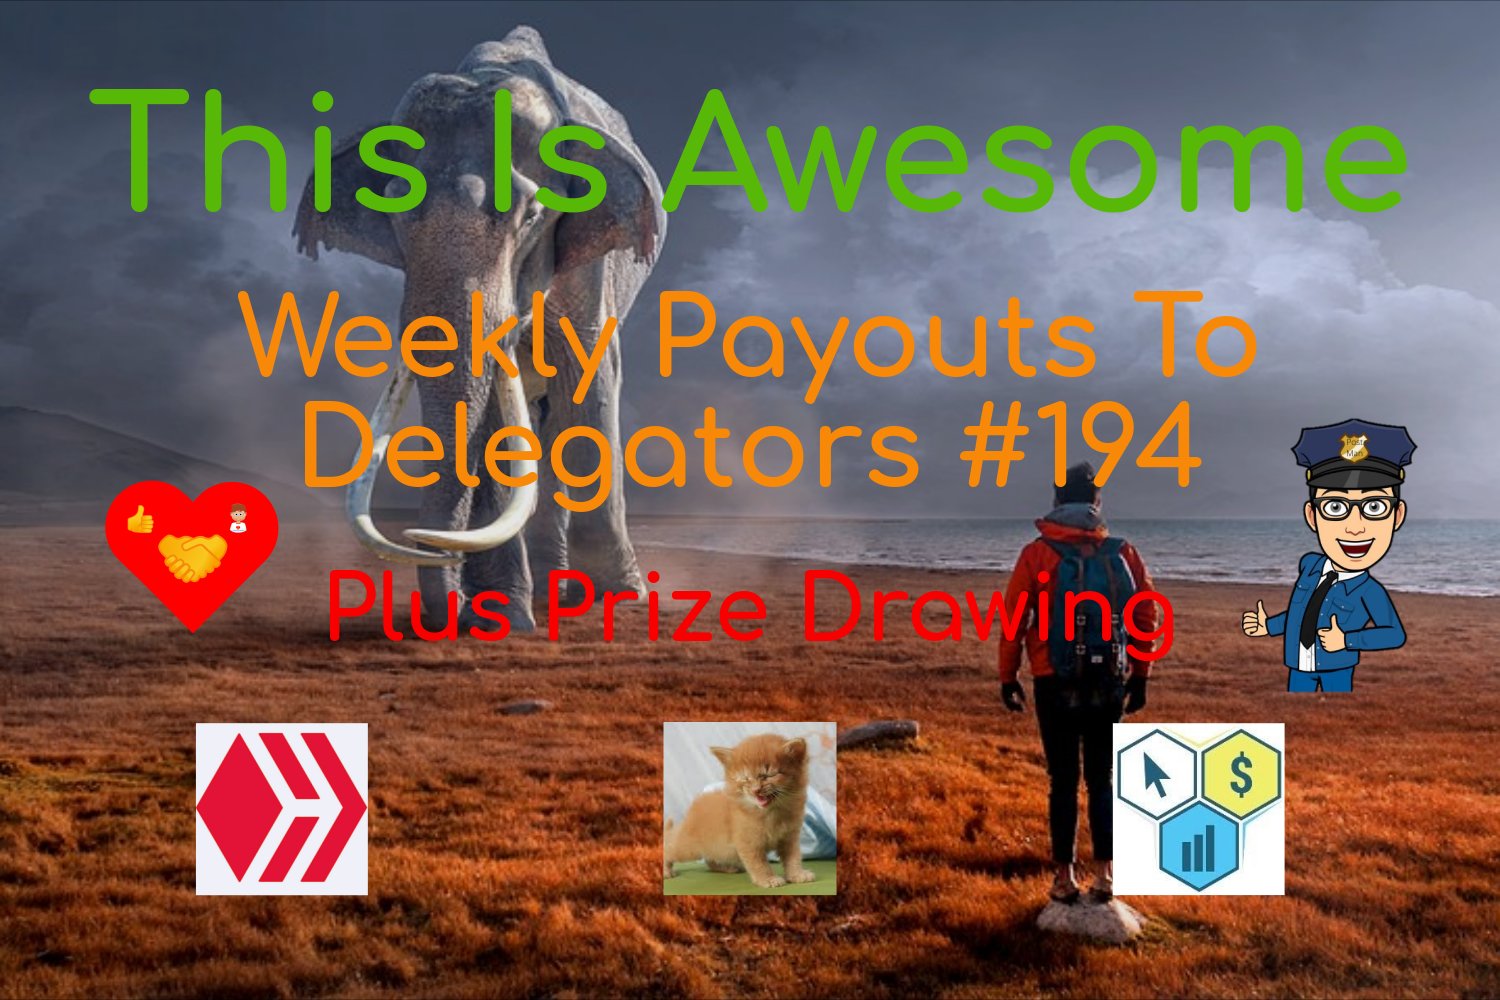 @thisisawesome/this-is-awesome-weekly-payouts-to-delegators-194-plus-prize-drawing